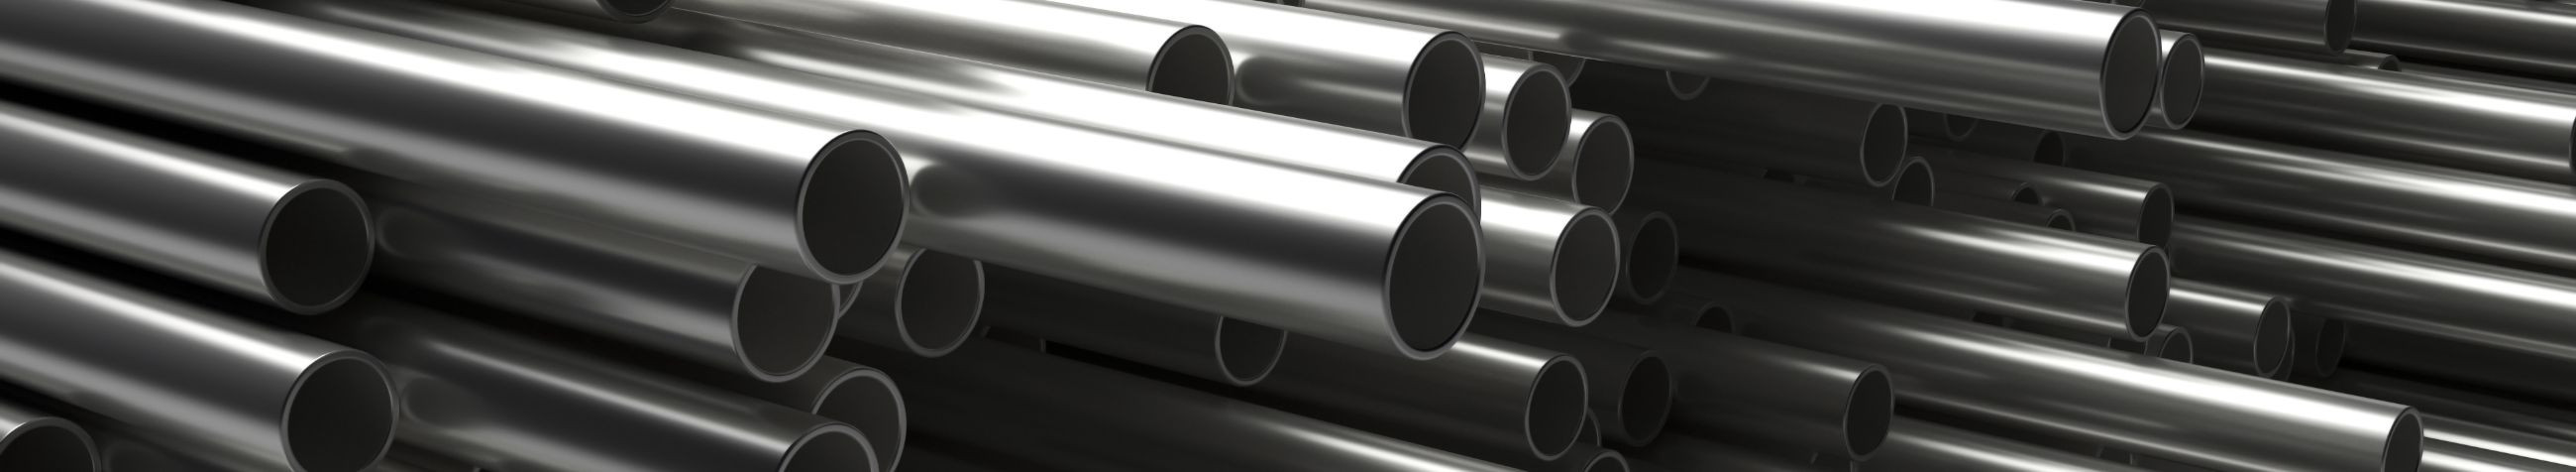 mineral resources and raw materials, Aluminium Sales, Stainless steel round, Stainless steel profiles, stainless steel sheets, Stainless steel tubes, Sale of stainless steel